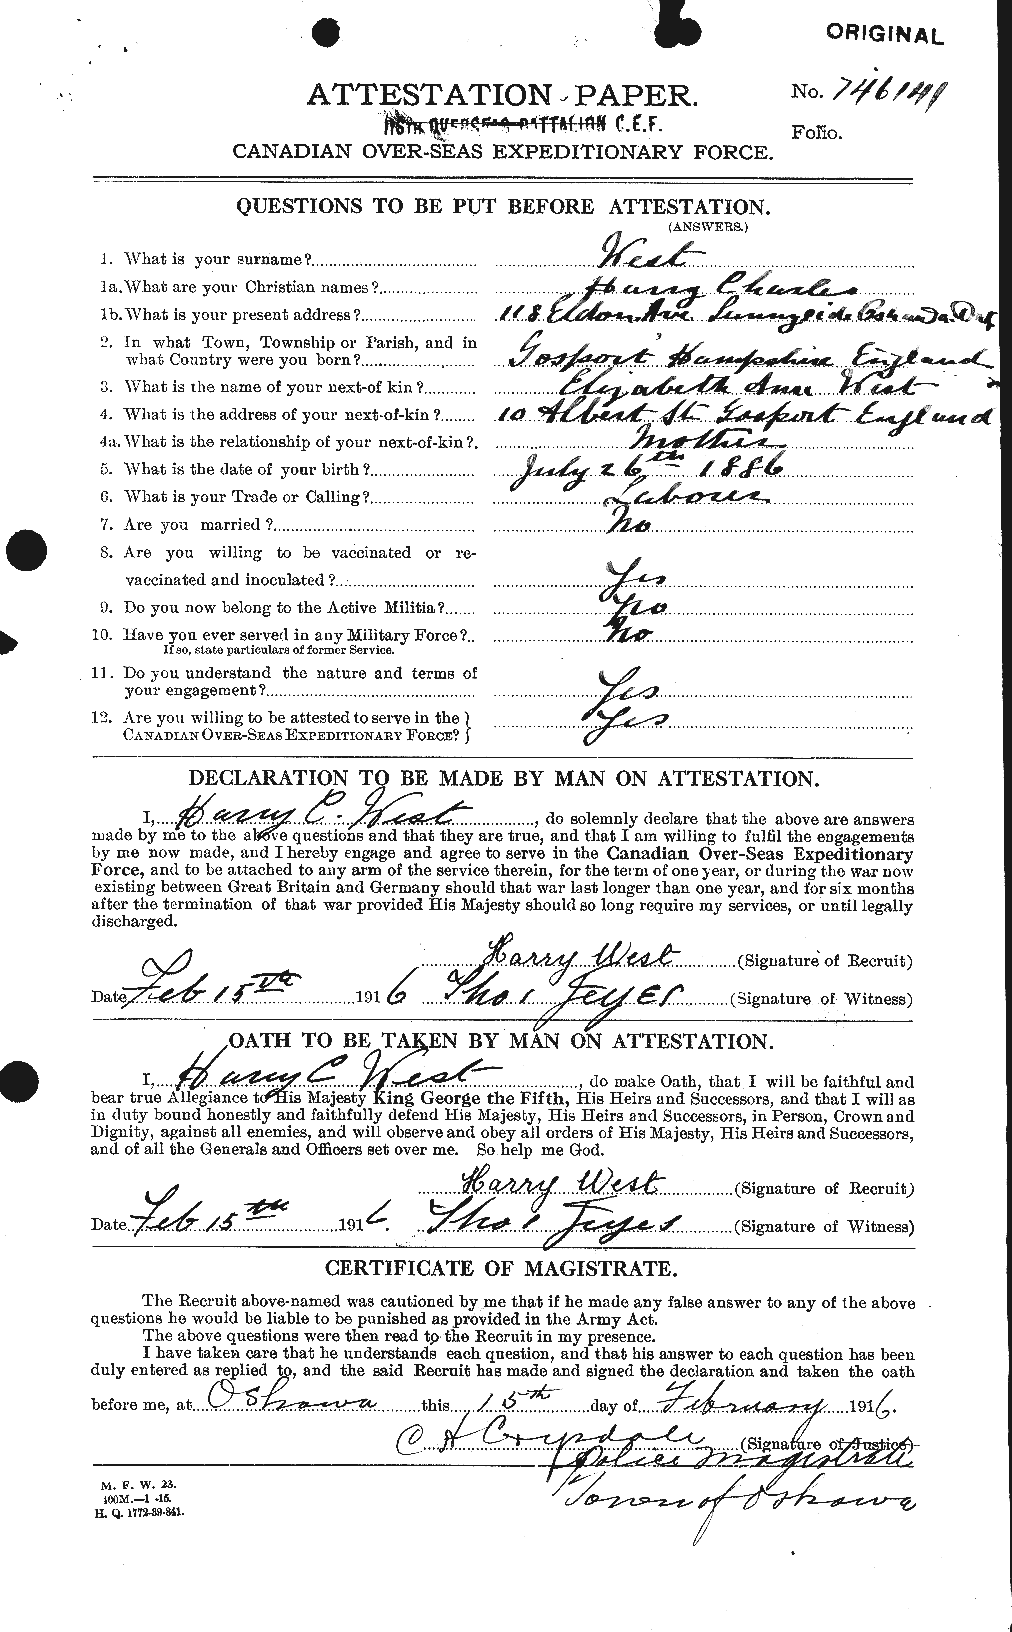 Personnel Records of the First World War - CEF 666208a